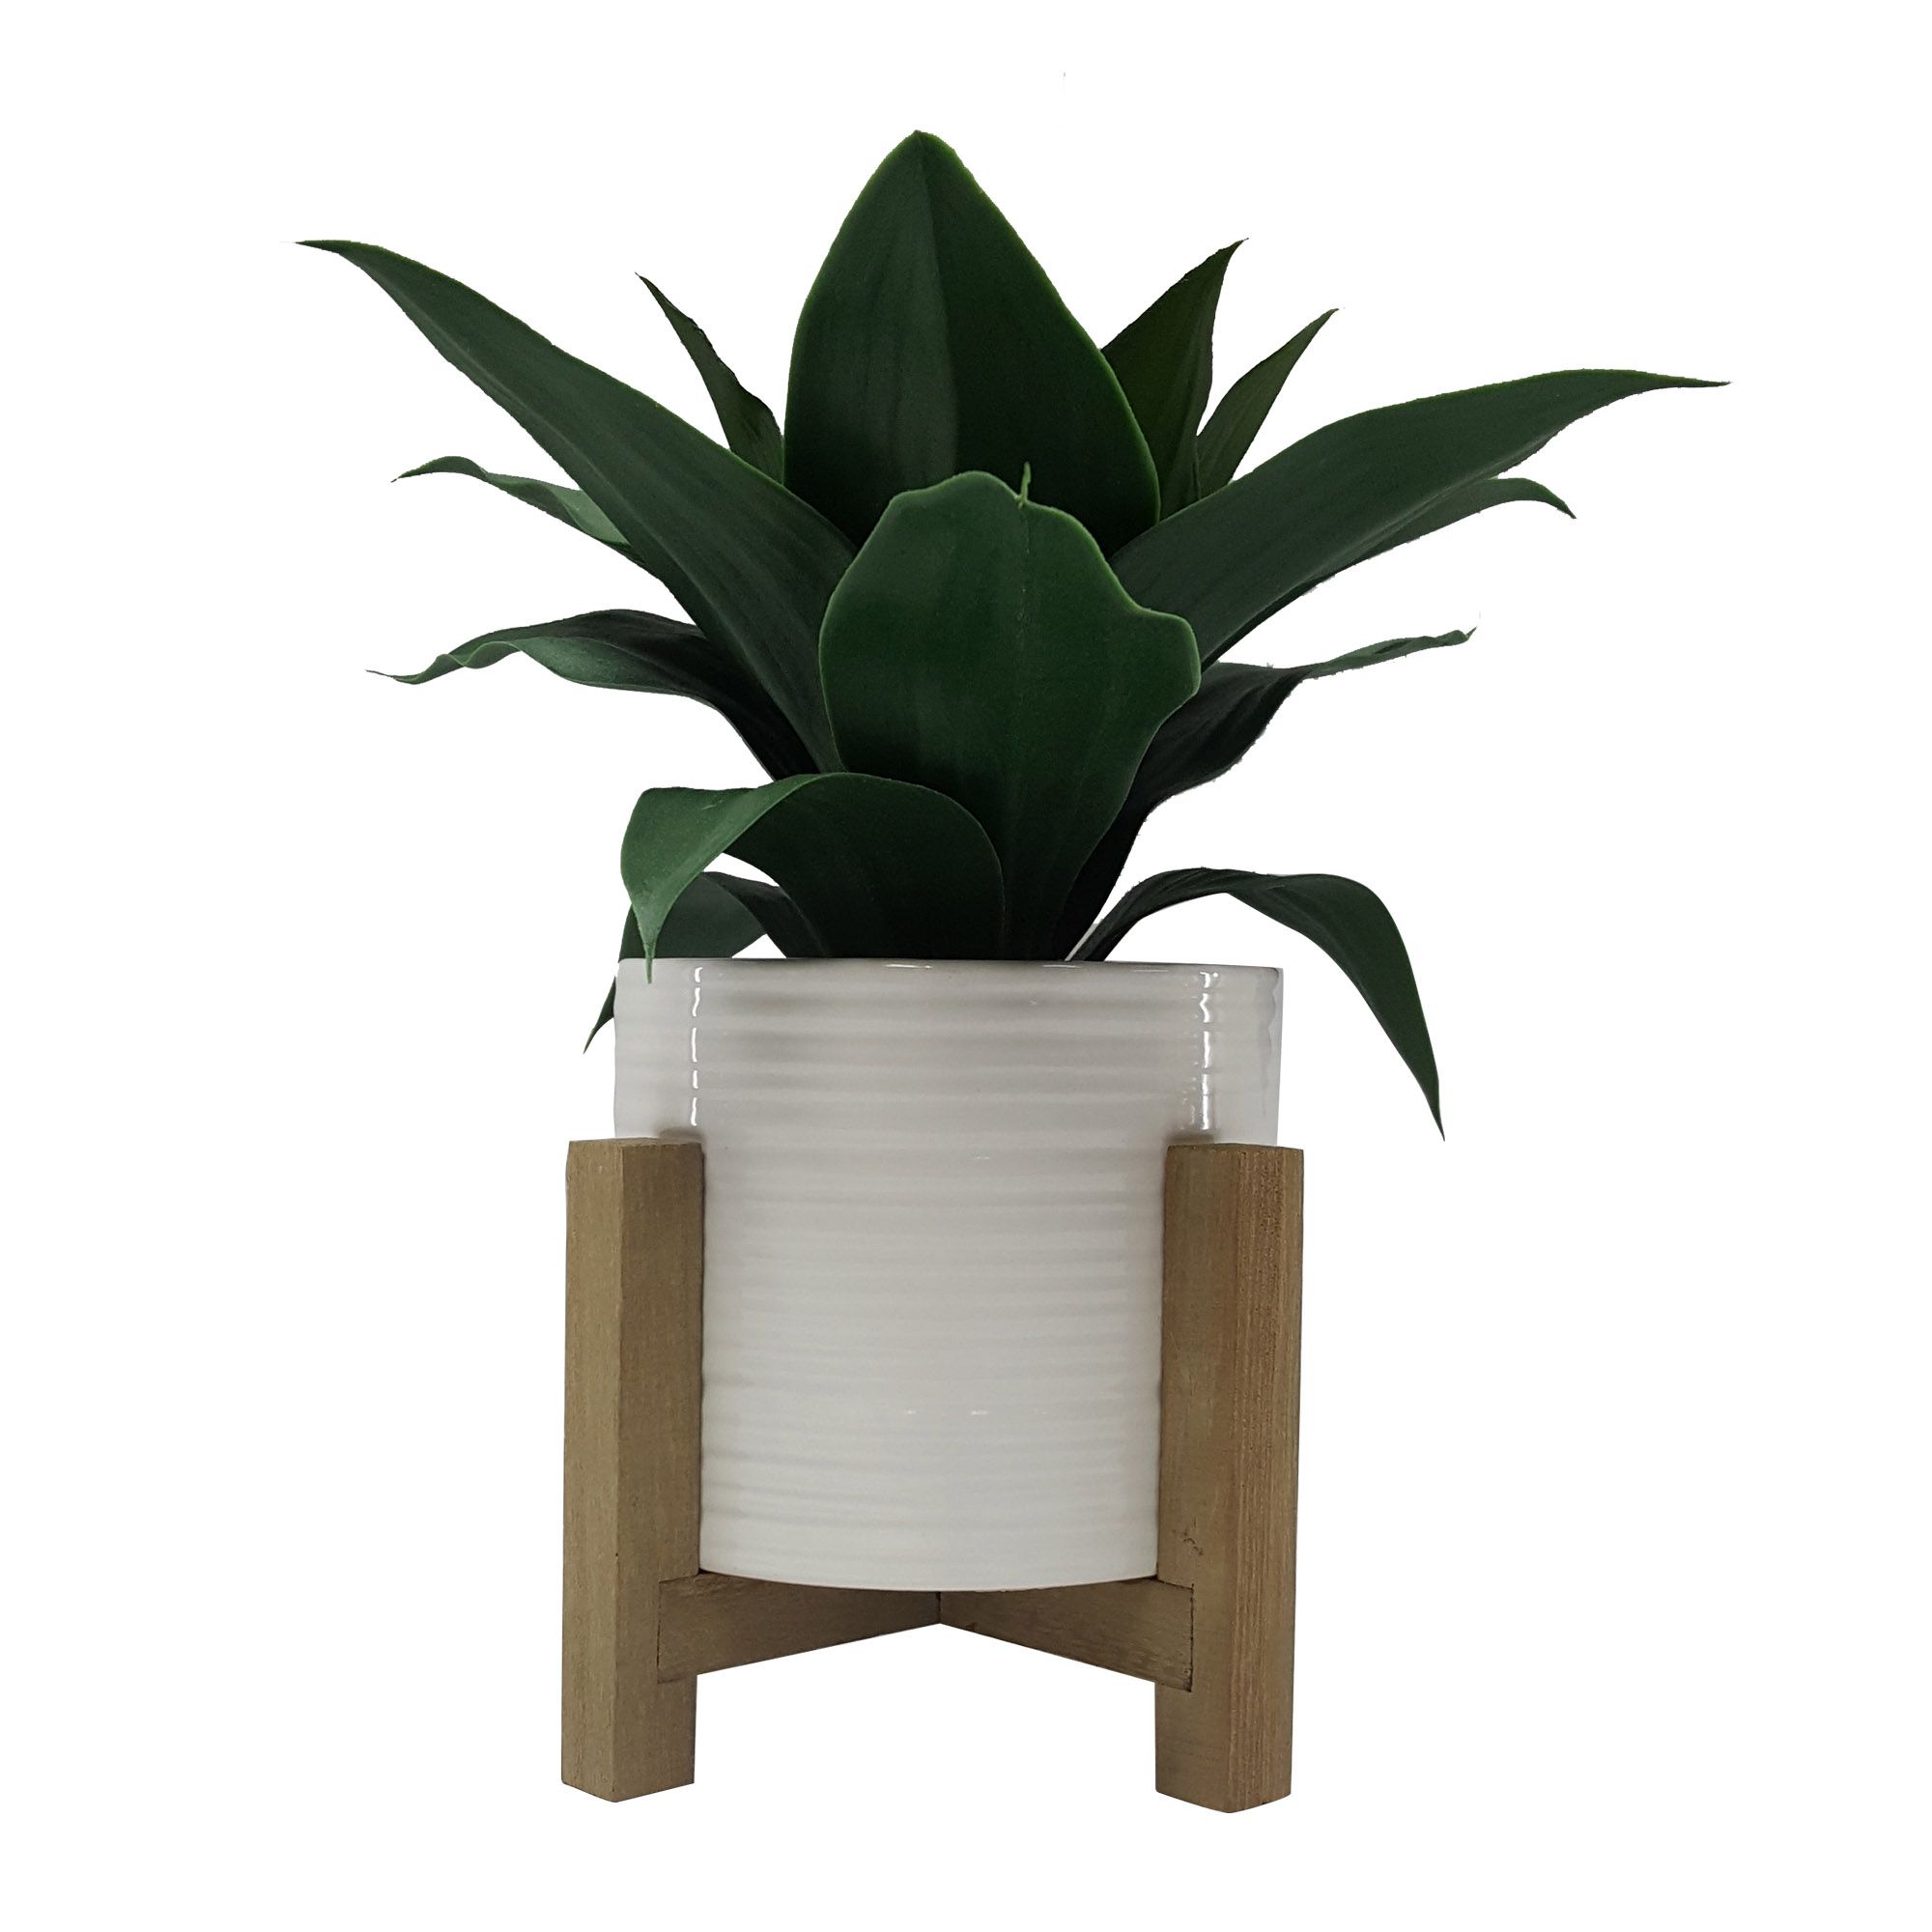 Better Homes & Gardens 10" Artificial Agave Plant in White Ceramic Pot with Wood Stand - image 1 of 7